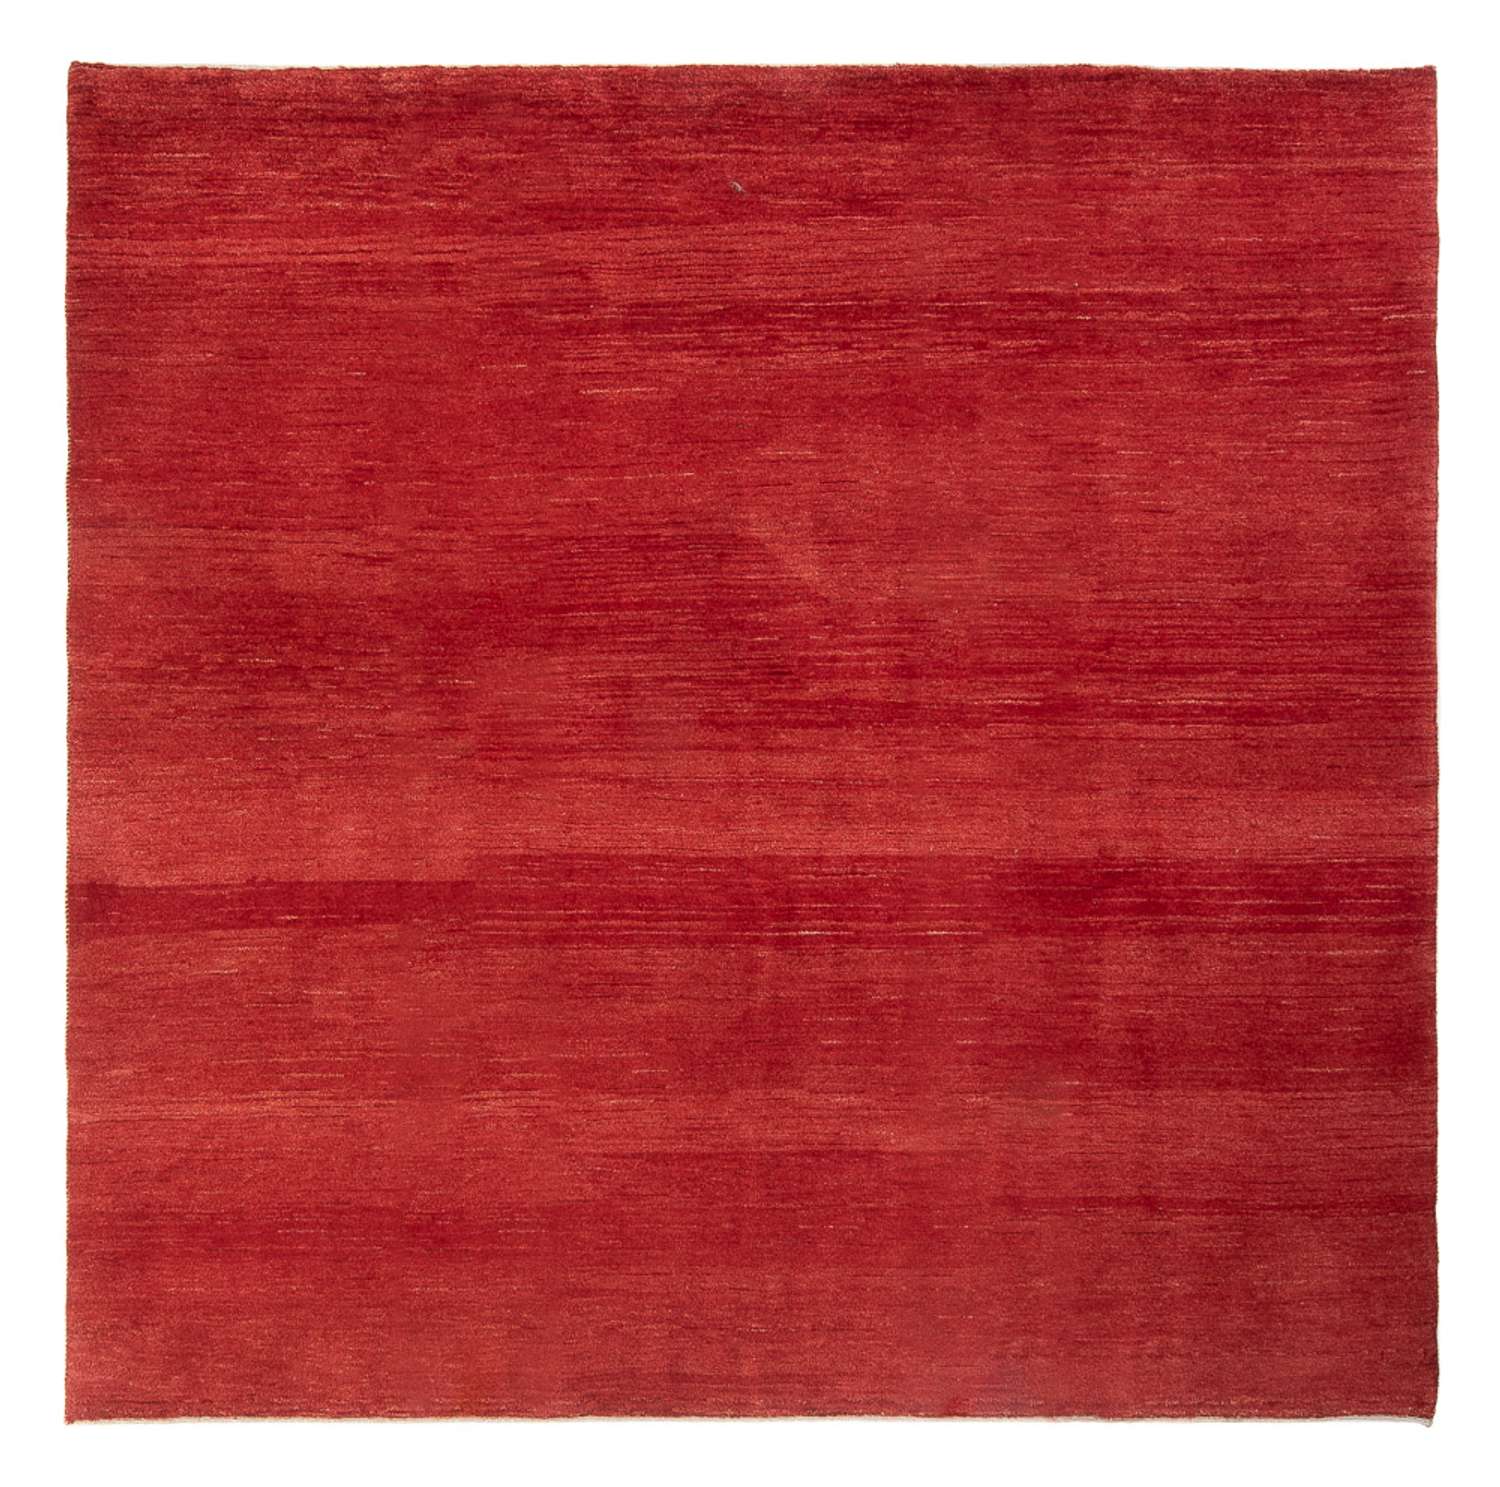 Gabbeh Rug - Perser square  - 210 x 210 cm - red